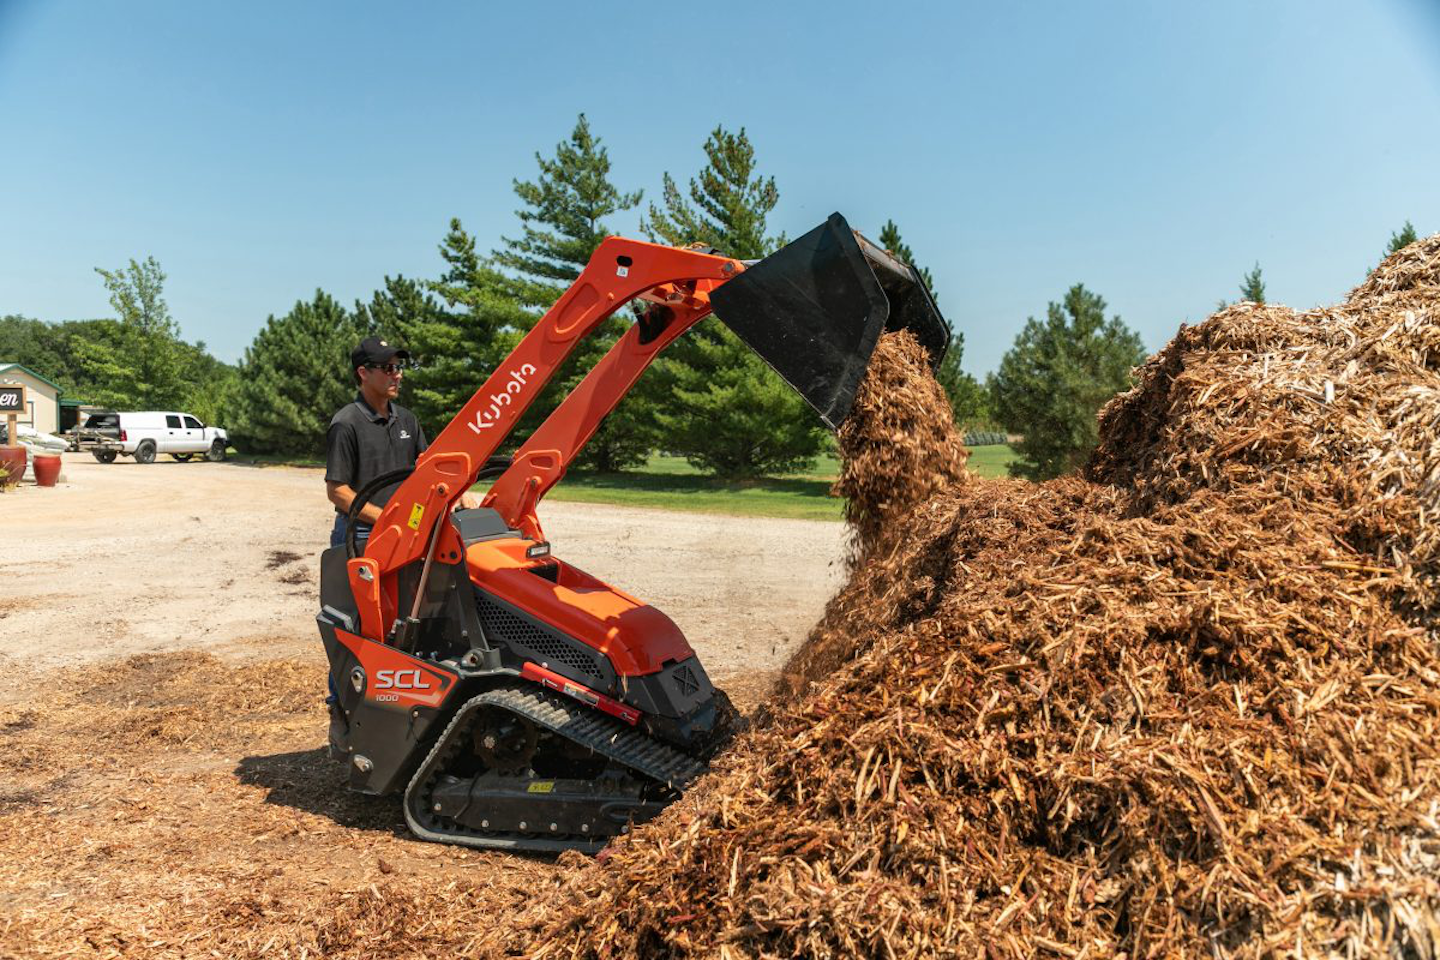 kubota-launches-its-first-mini-skid-steer-total-landscape-care